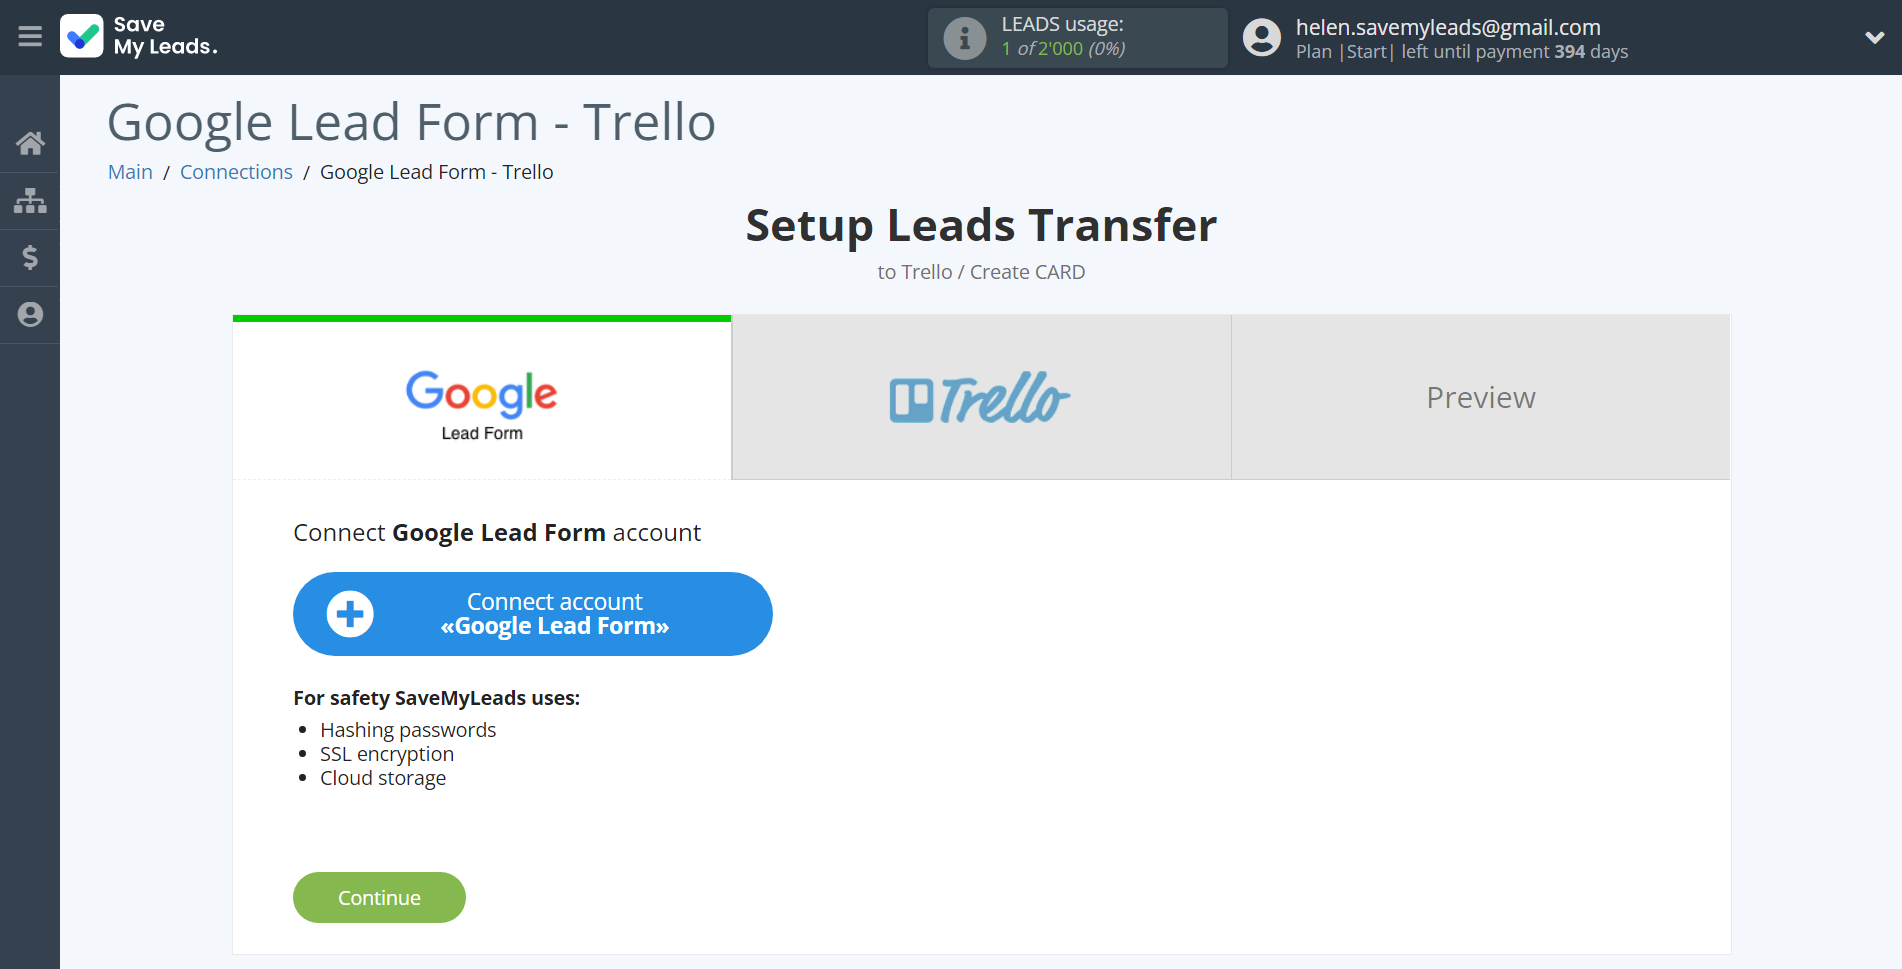 How to Connect Google Lead Form with Trello | Data Source account